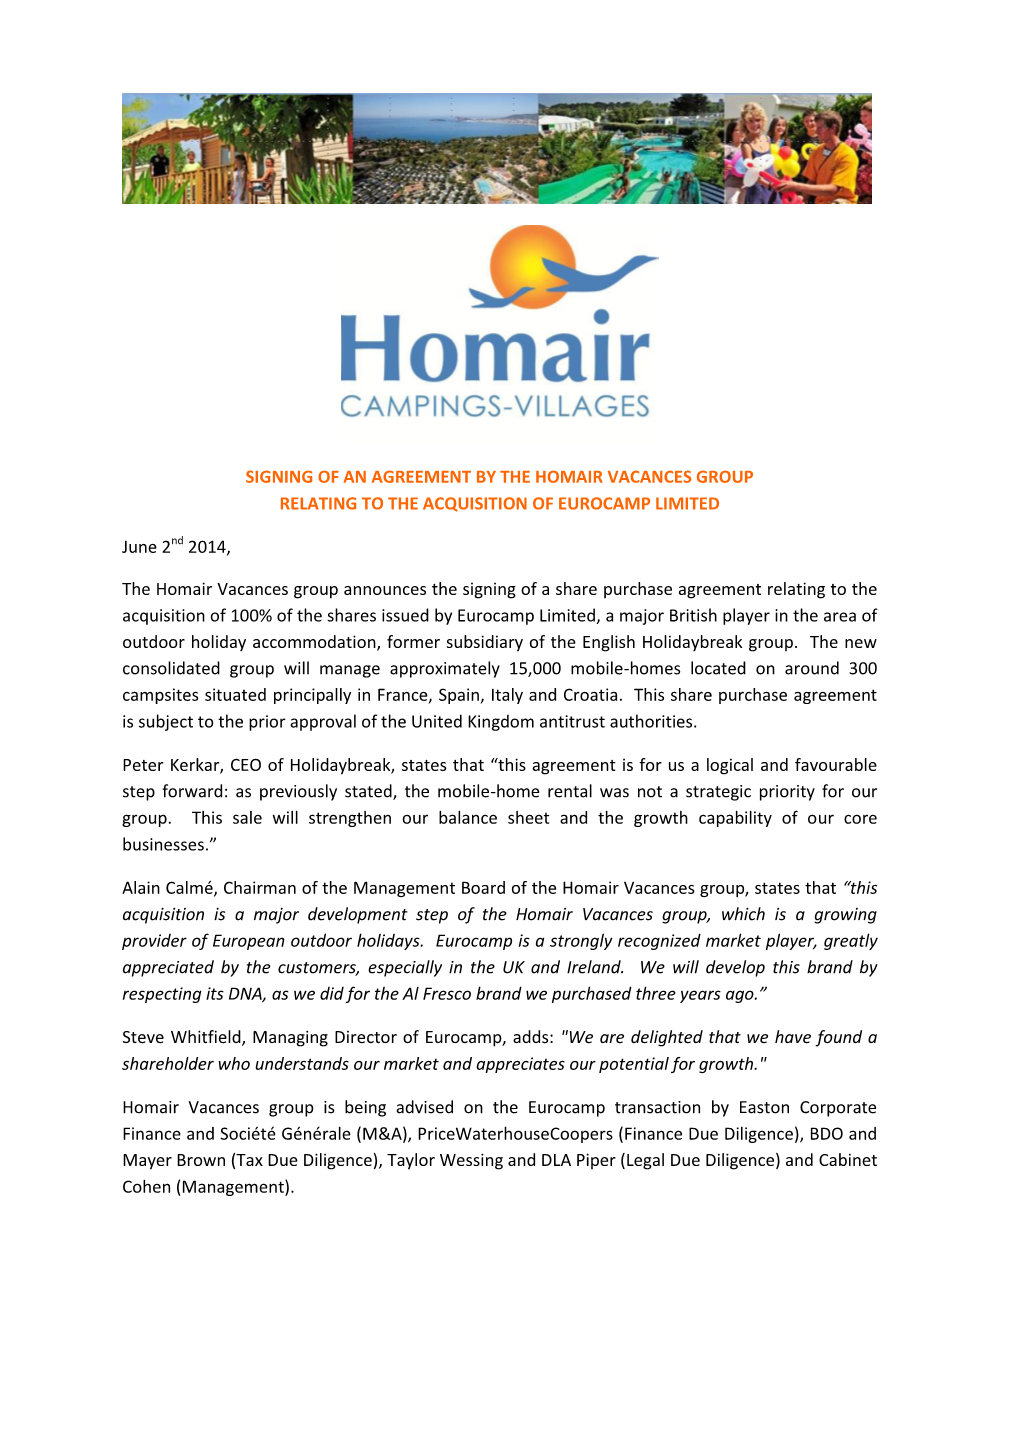 Signing of an Agreement by the Homair Vacances Group Relating to the Acquisition of Eurocamp Limited